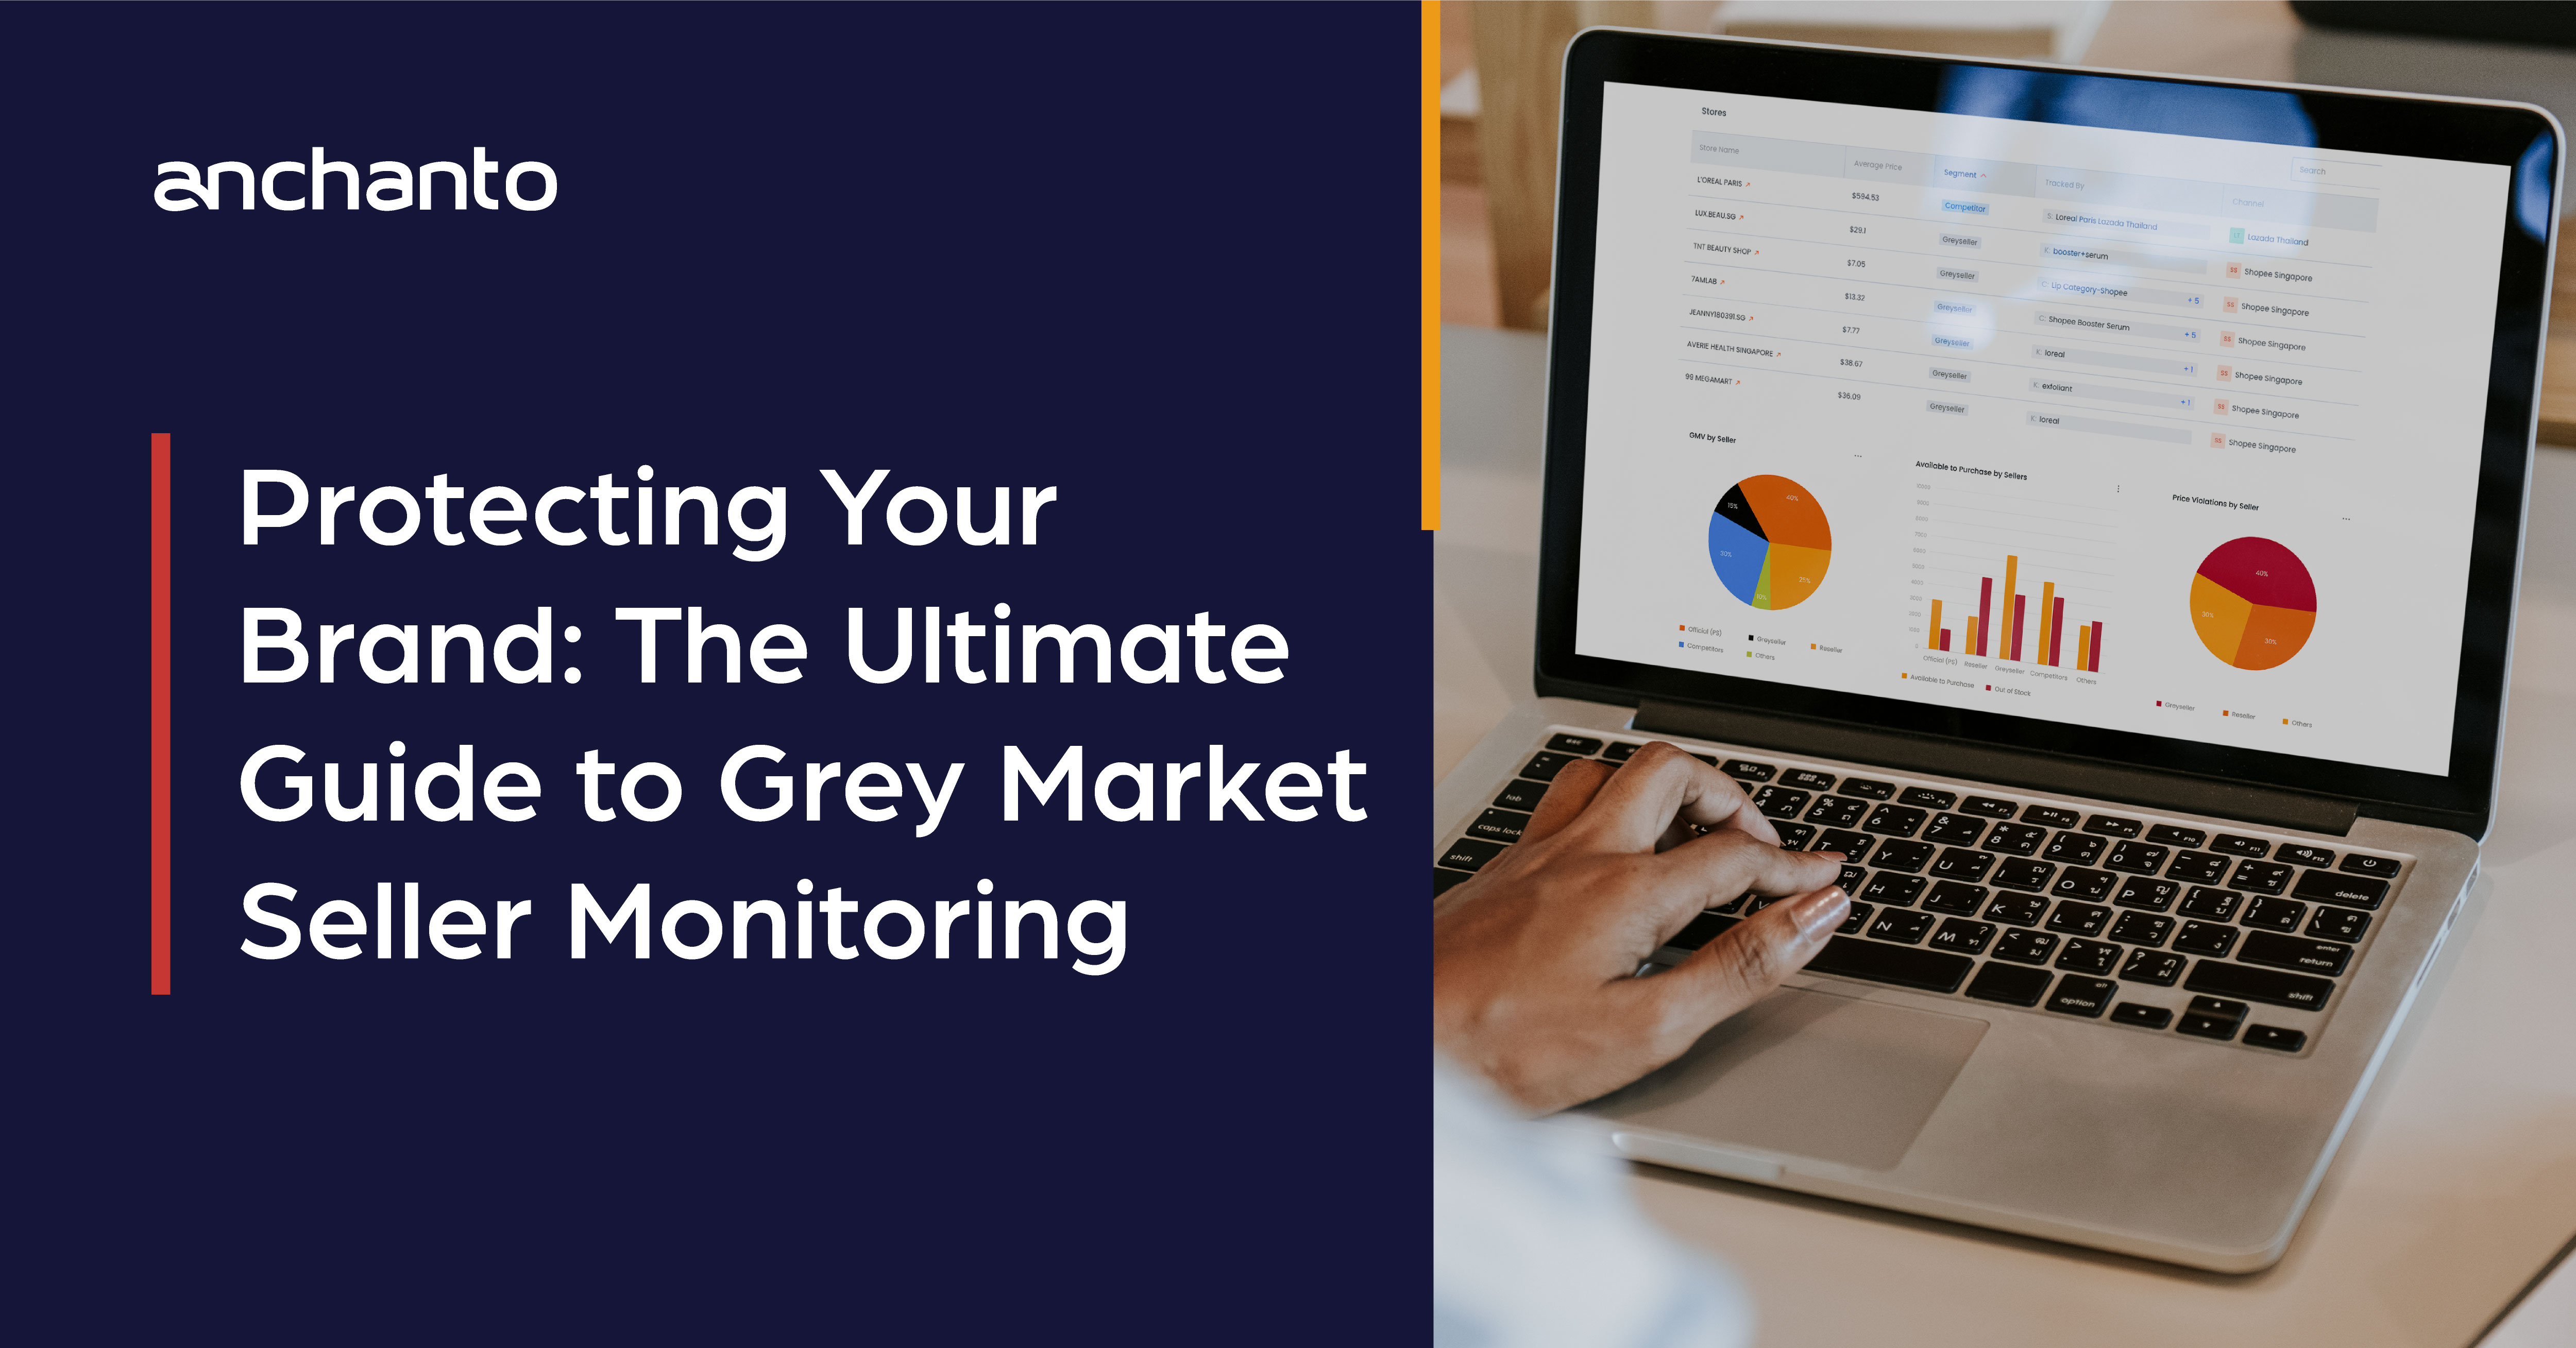 Protecting Your Brand: The Ultimate Guide to Grey Market Seller Monitoring